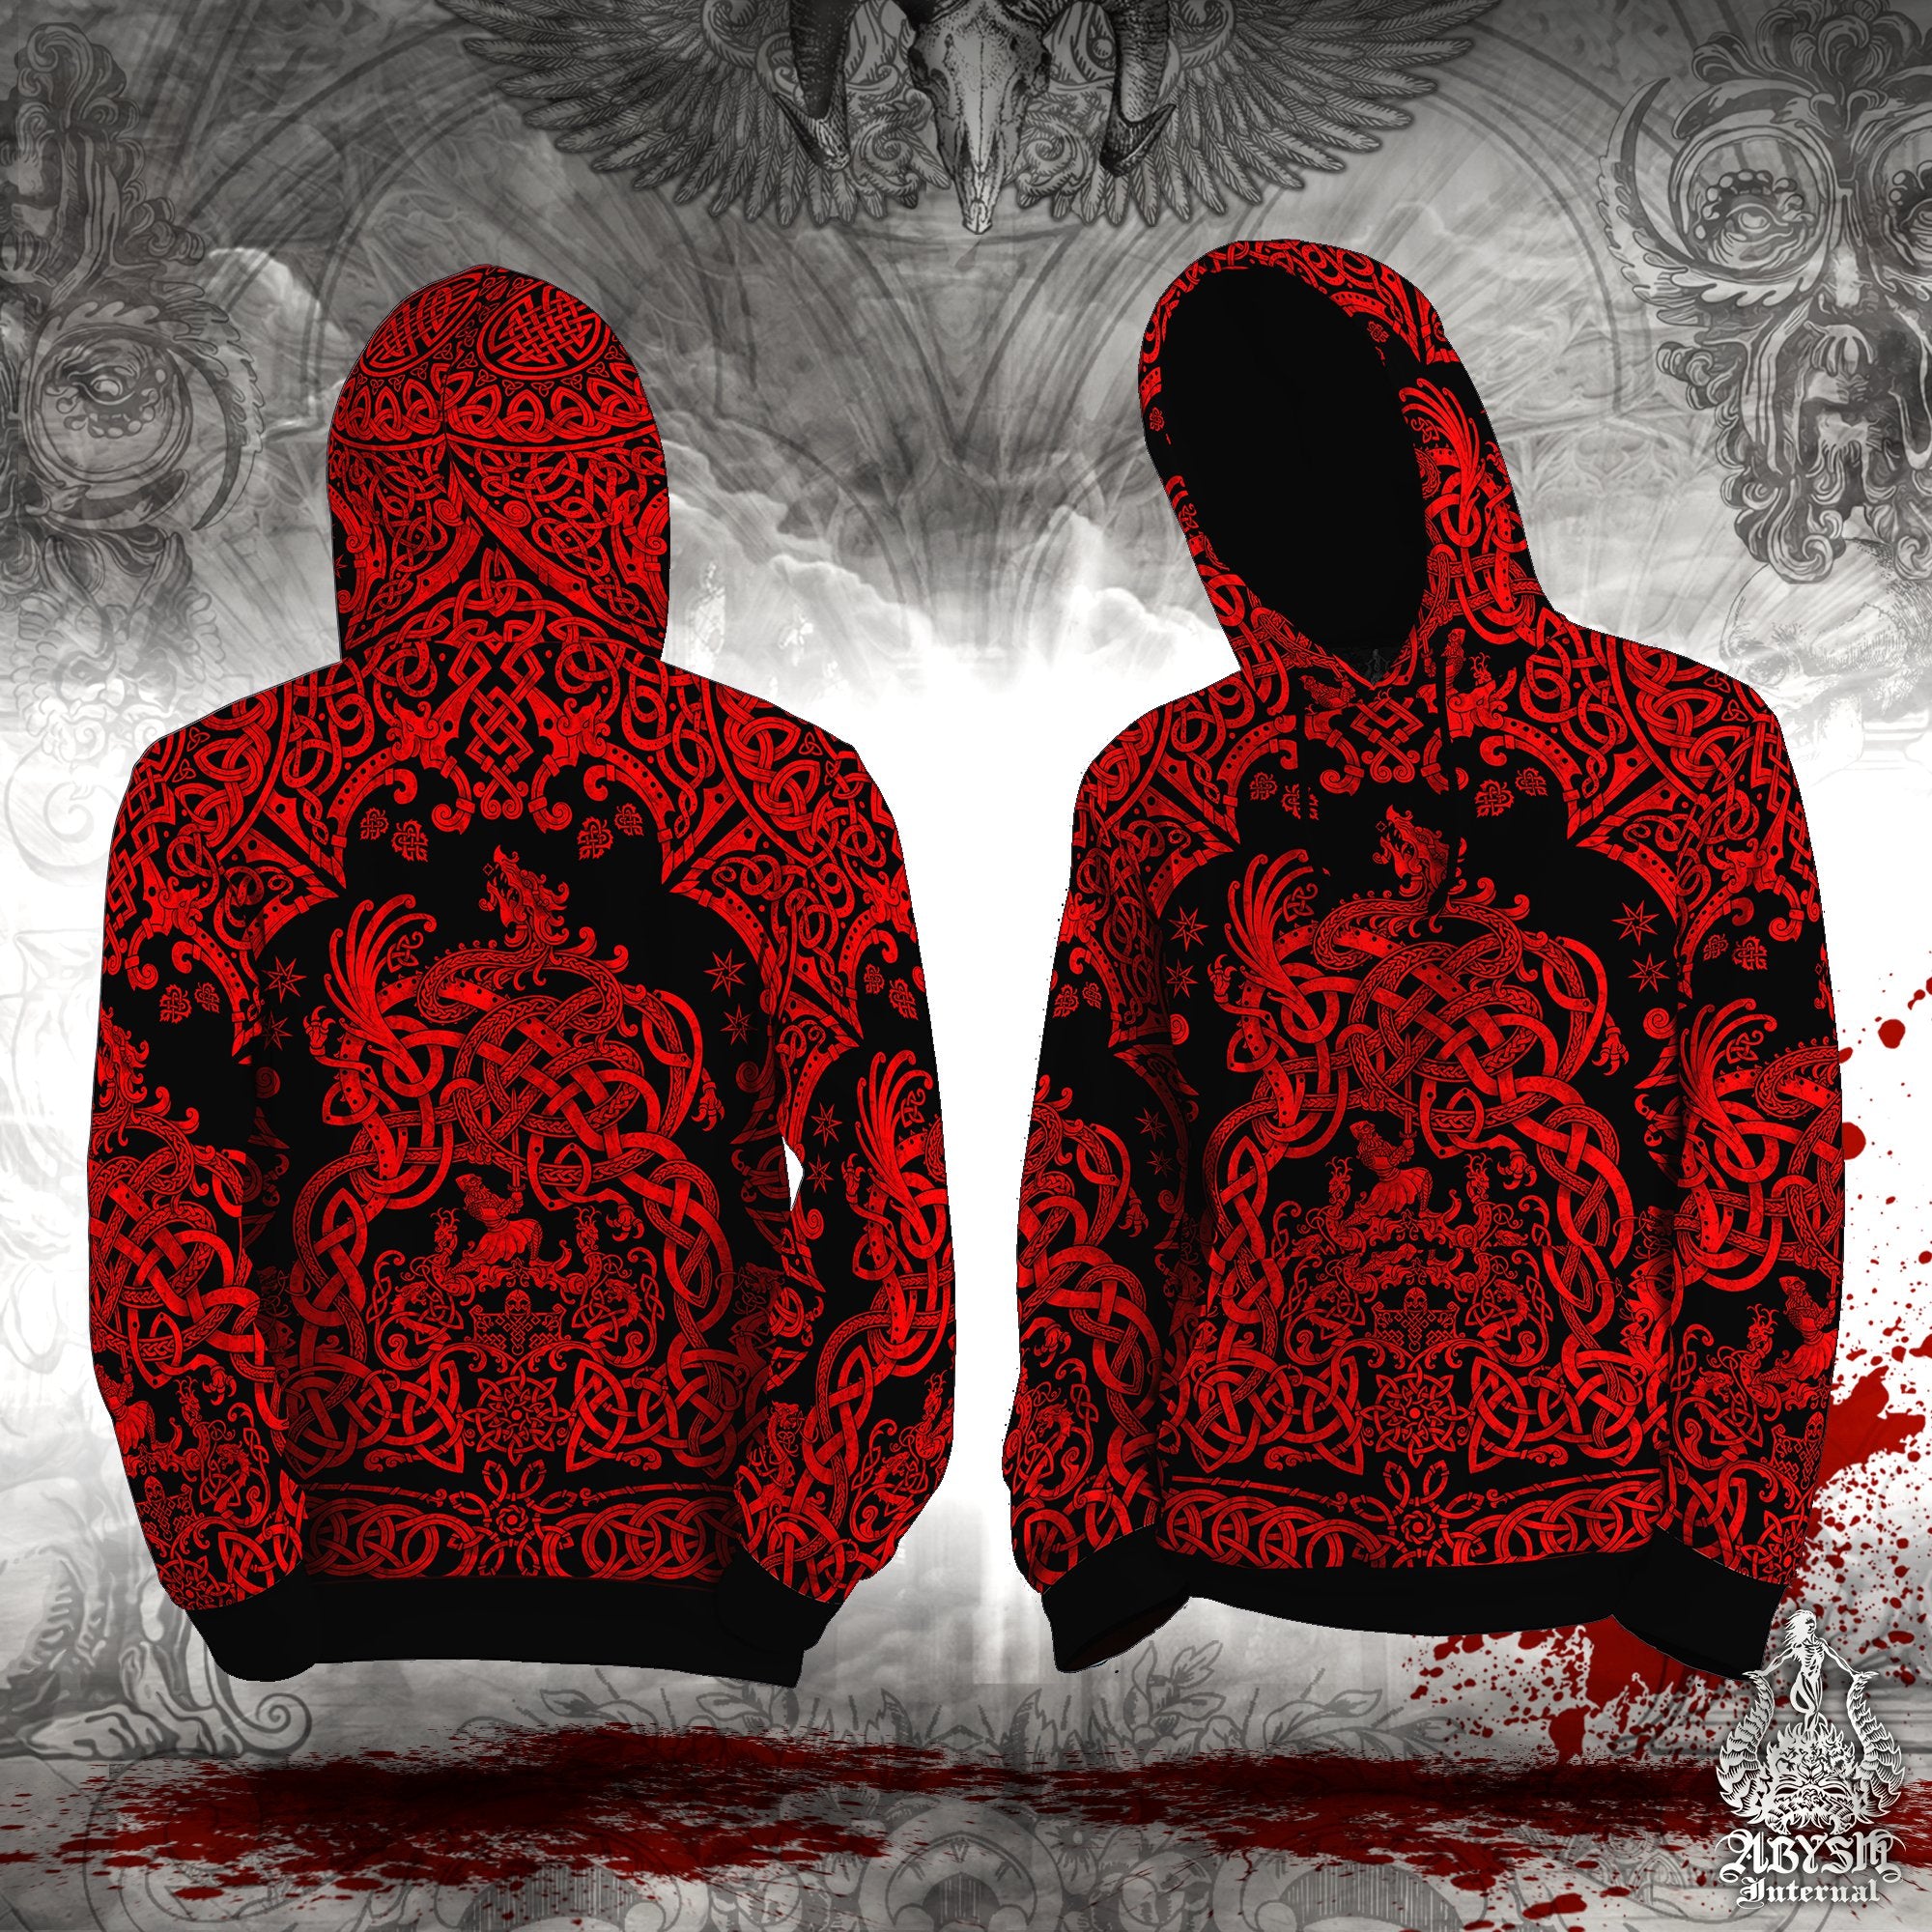 Viking Hoodie, Black and Red Pullover, Street Outfit, Norse Sweater, Nordic Art Streetwear, Alternative Clothing, Unisex - Dragon Fafnir - Abysm Internal